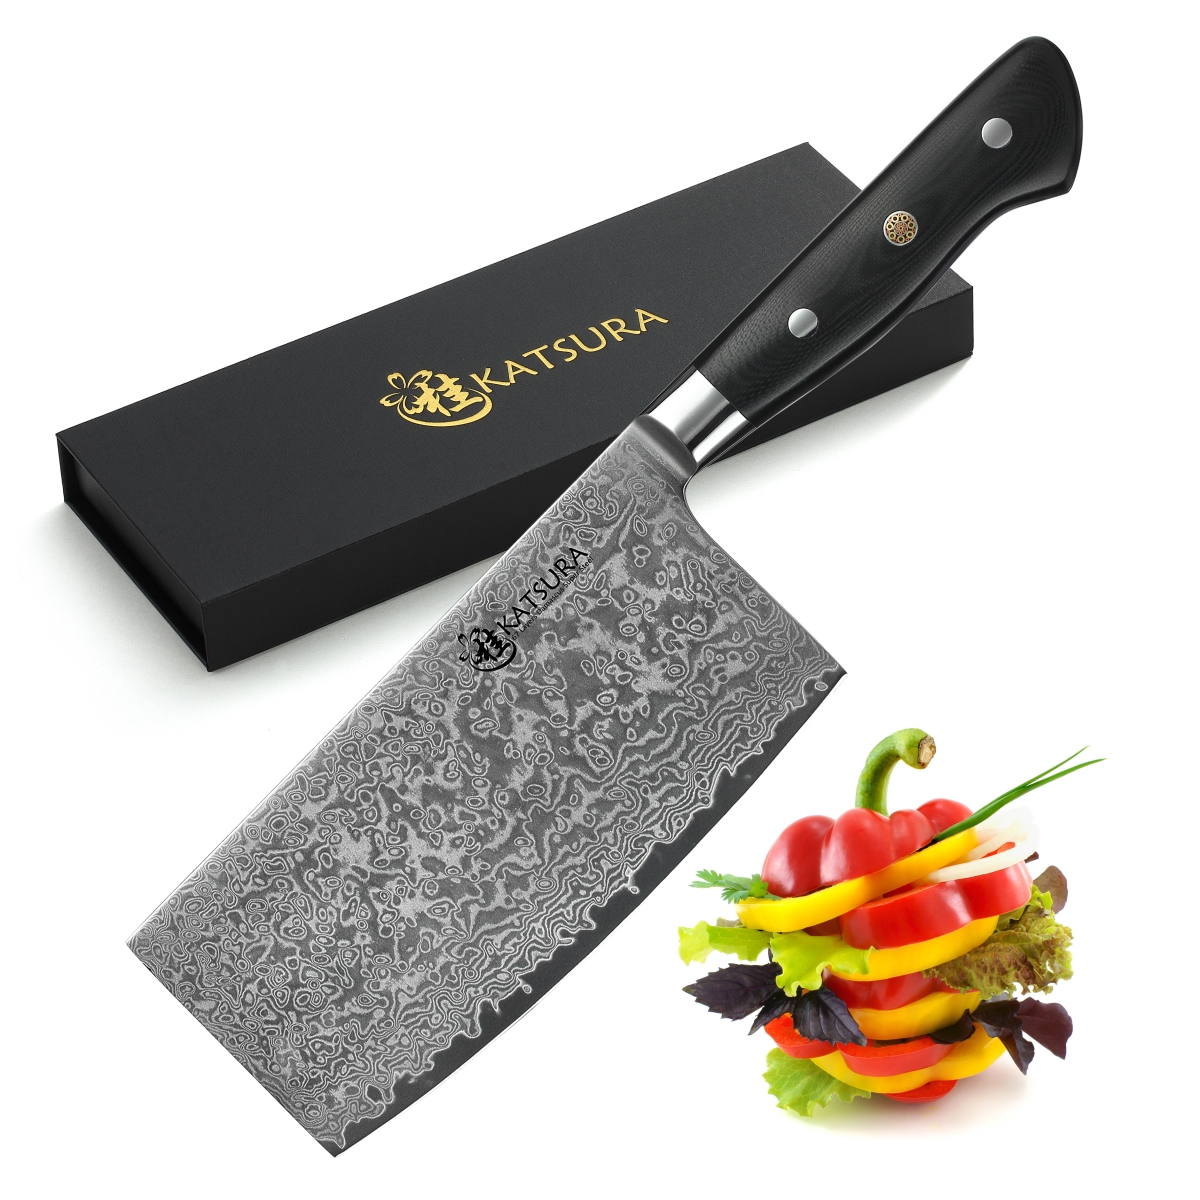 KATSURA Cutlery CKGA7G Japanese Premium AUS 10-67 Layers Damascus Steel 6.5 in. Chinese Cleaver Knife with G10 handle